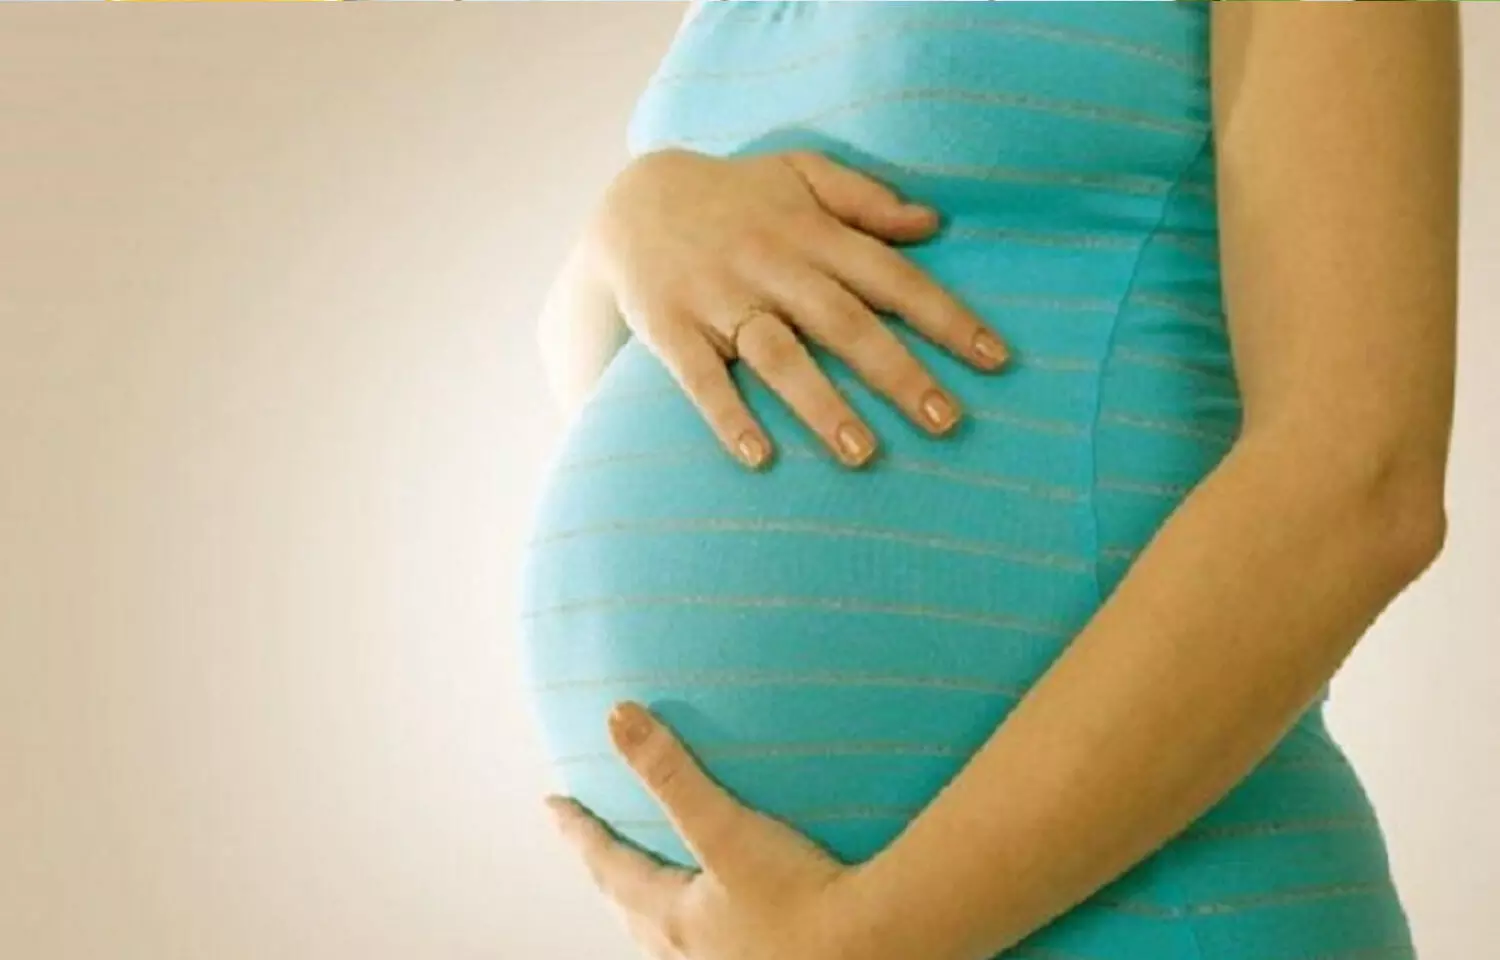 Topical corticosteroid use in pregnancy may not increase risk of SGA or low birth weight: JAMA